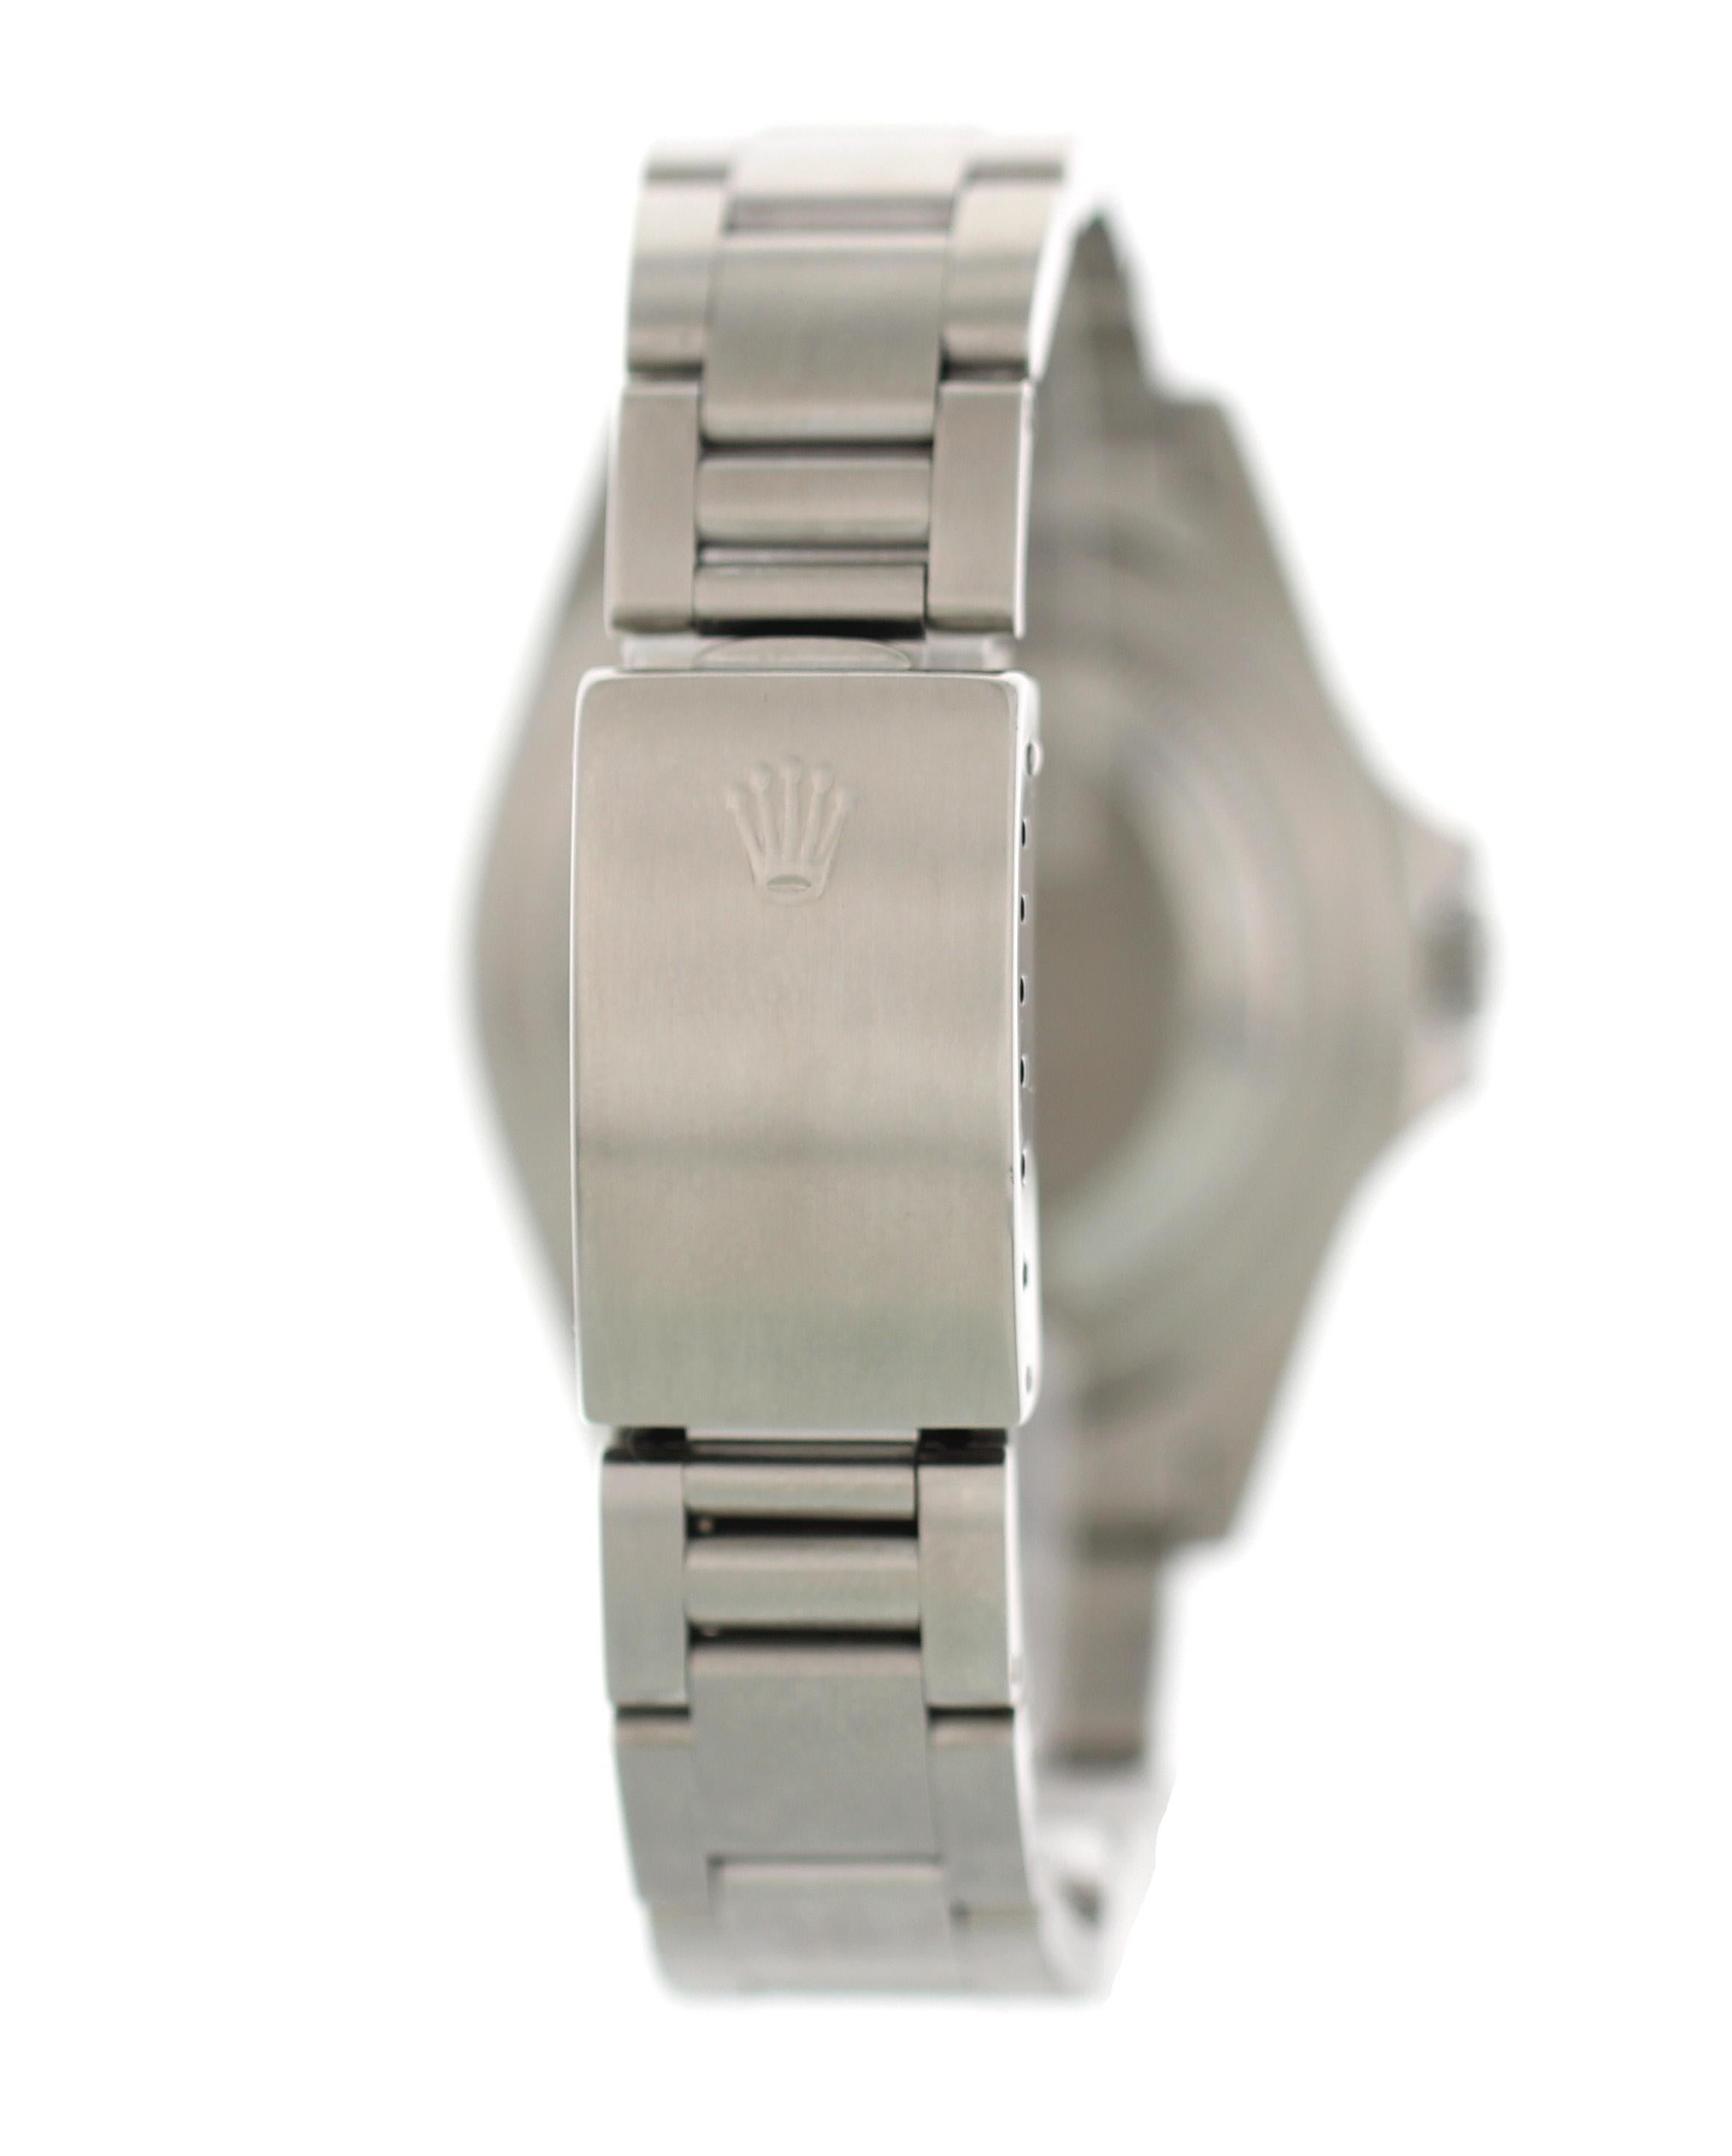 Rolex Explorer II 16570 Stainless Steel Tritium White Dial In Excellent Condition For Sale In New York, NY